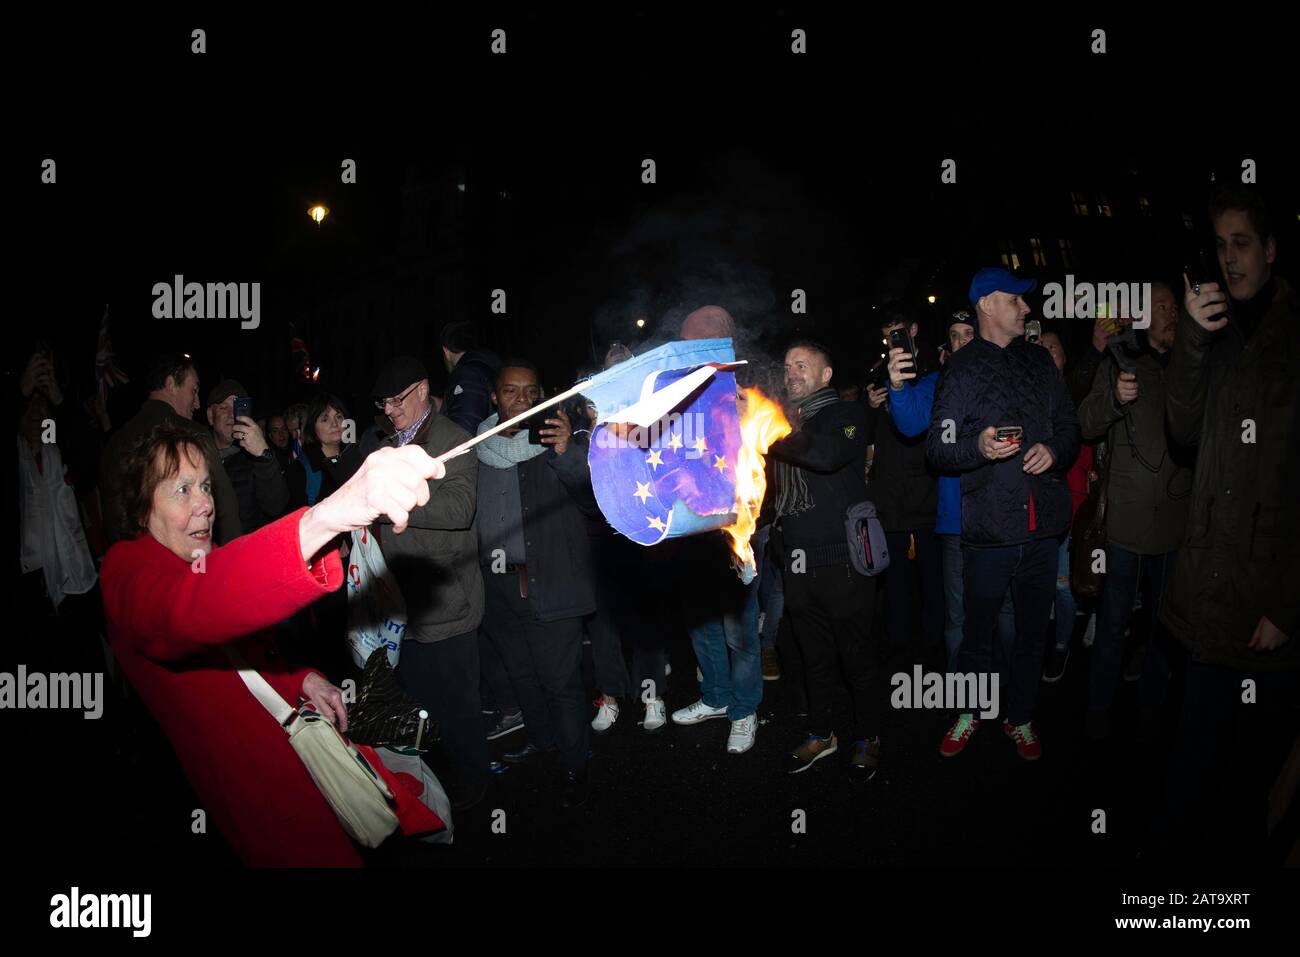 London, January 31st 2020 Convertive protesters celebrate the start of Brexit as a ruselt of this more counter protesters fight the start of brexit ru Stock Photo